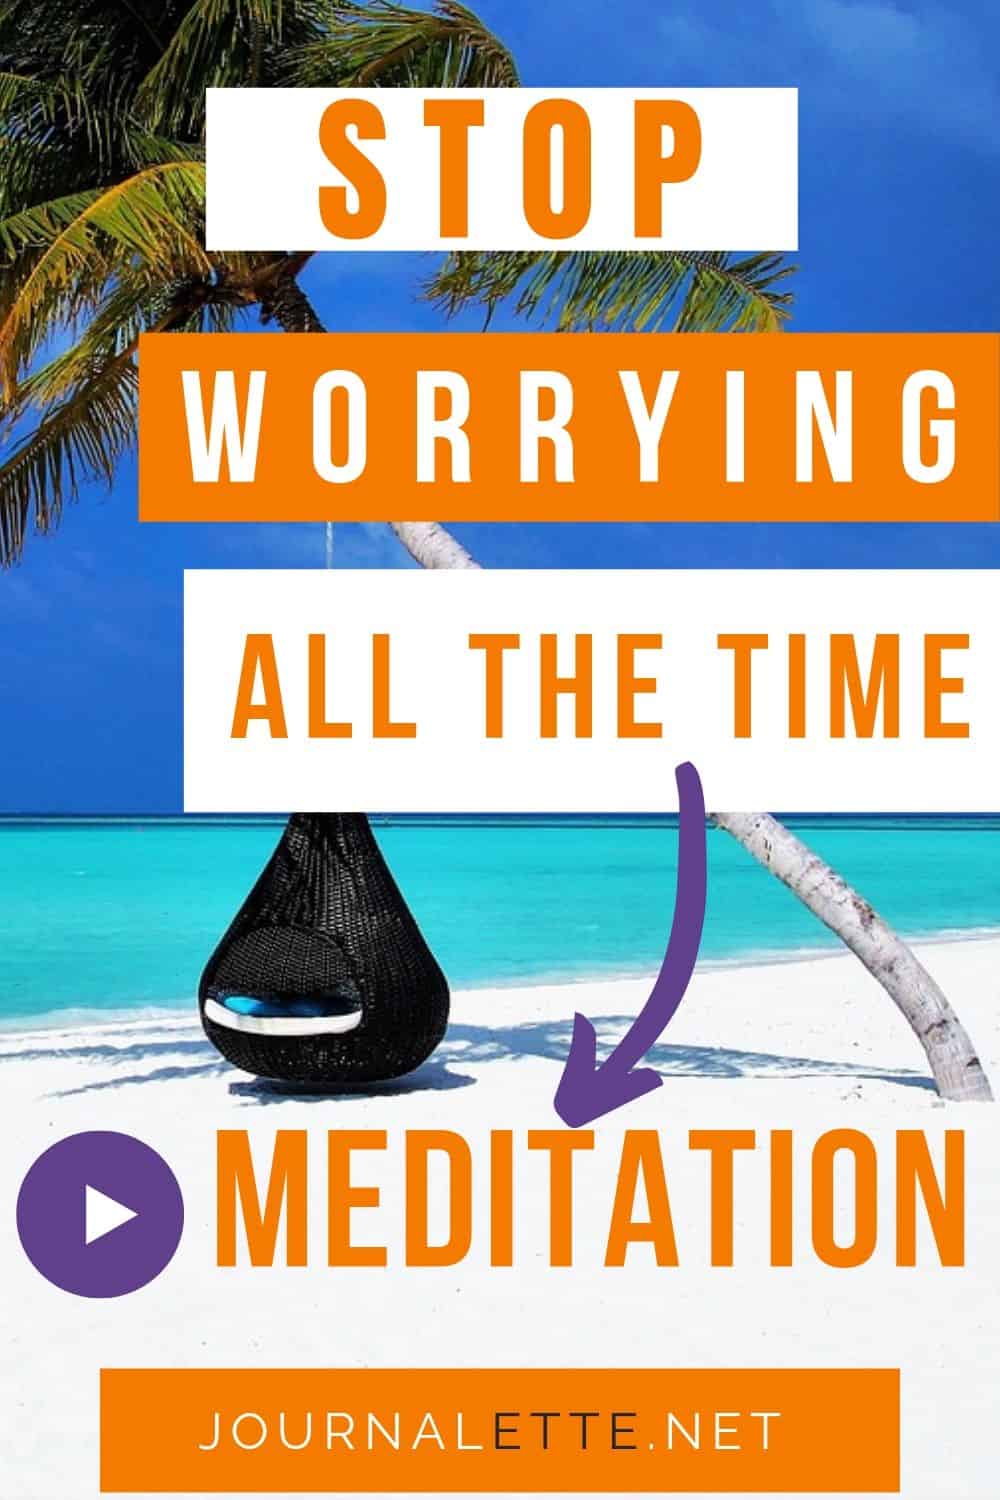 image of shore with text overlays stop worrying all the time meditation